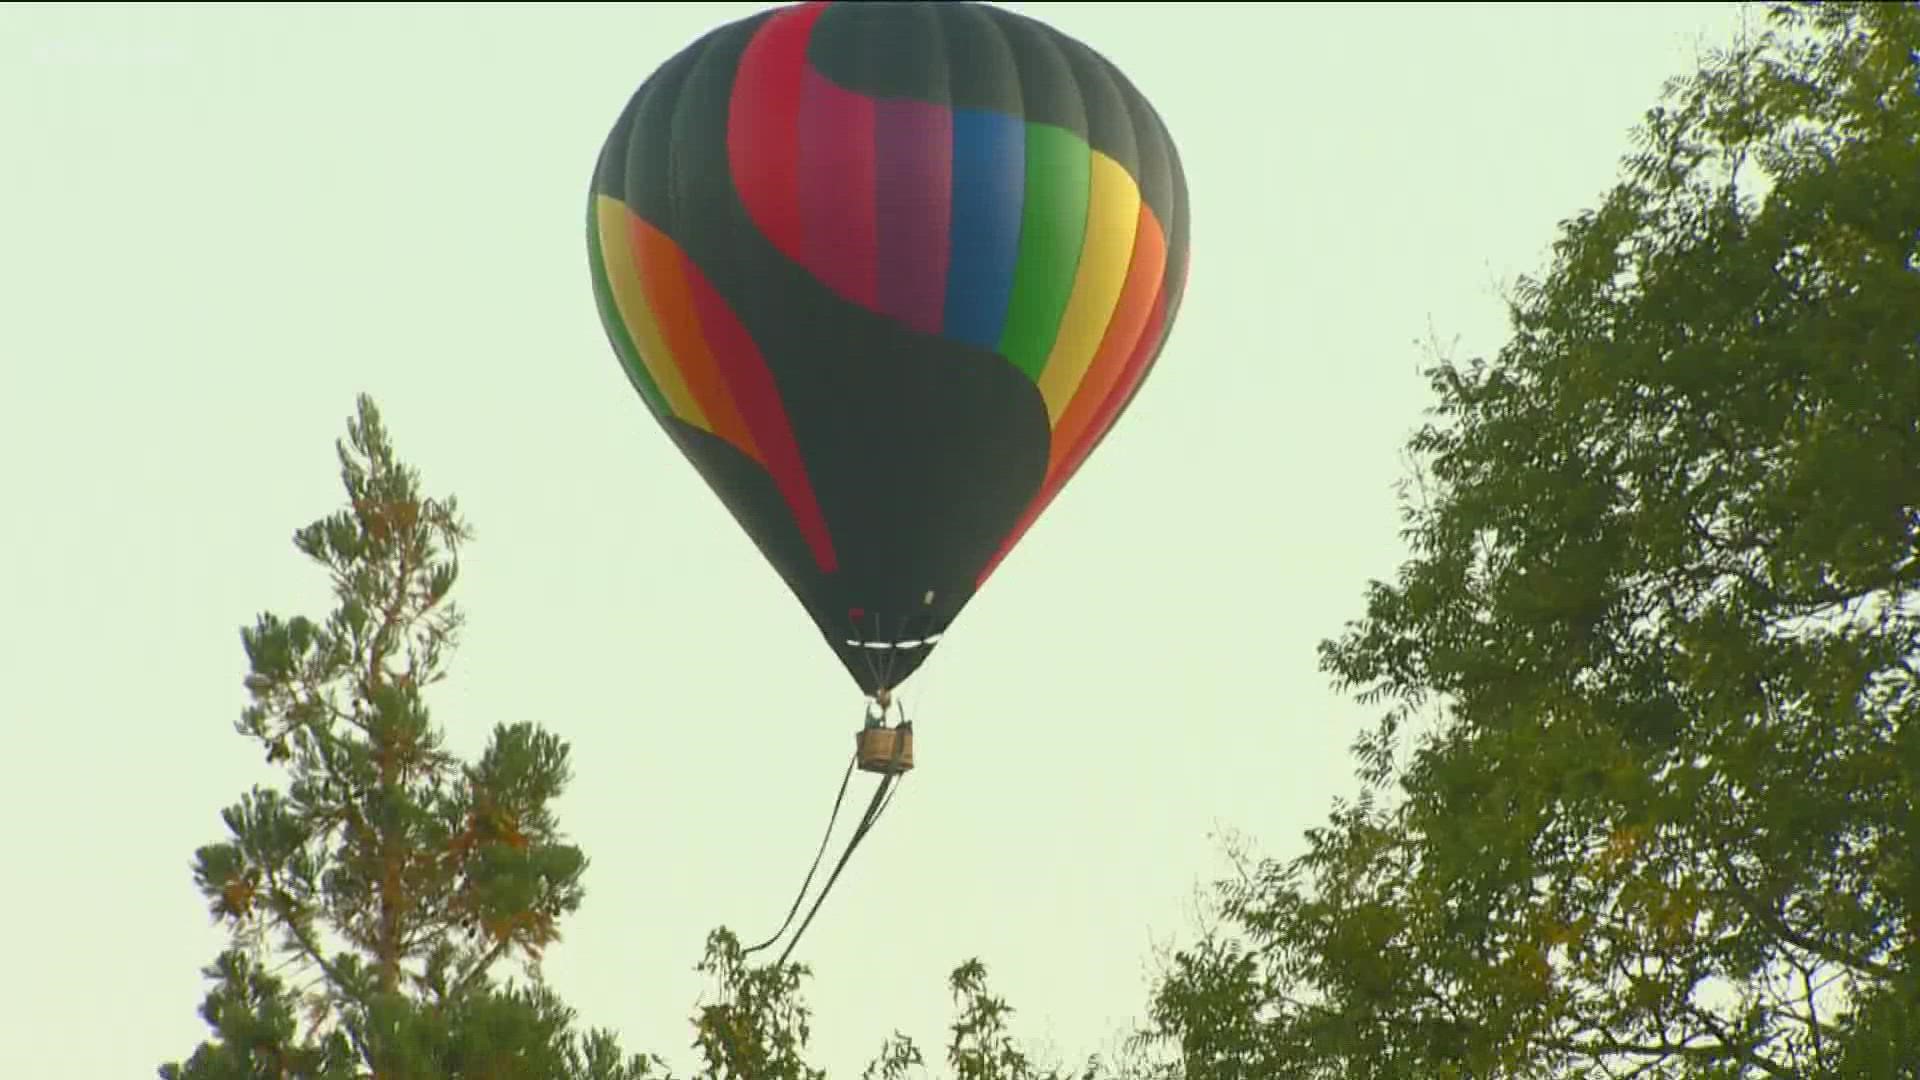 Spencer, the founder of the Spirit of Boise Balloon Classic, was honored on Friday after his passing in 2020.